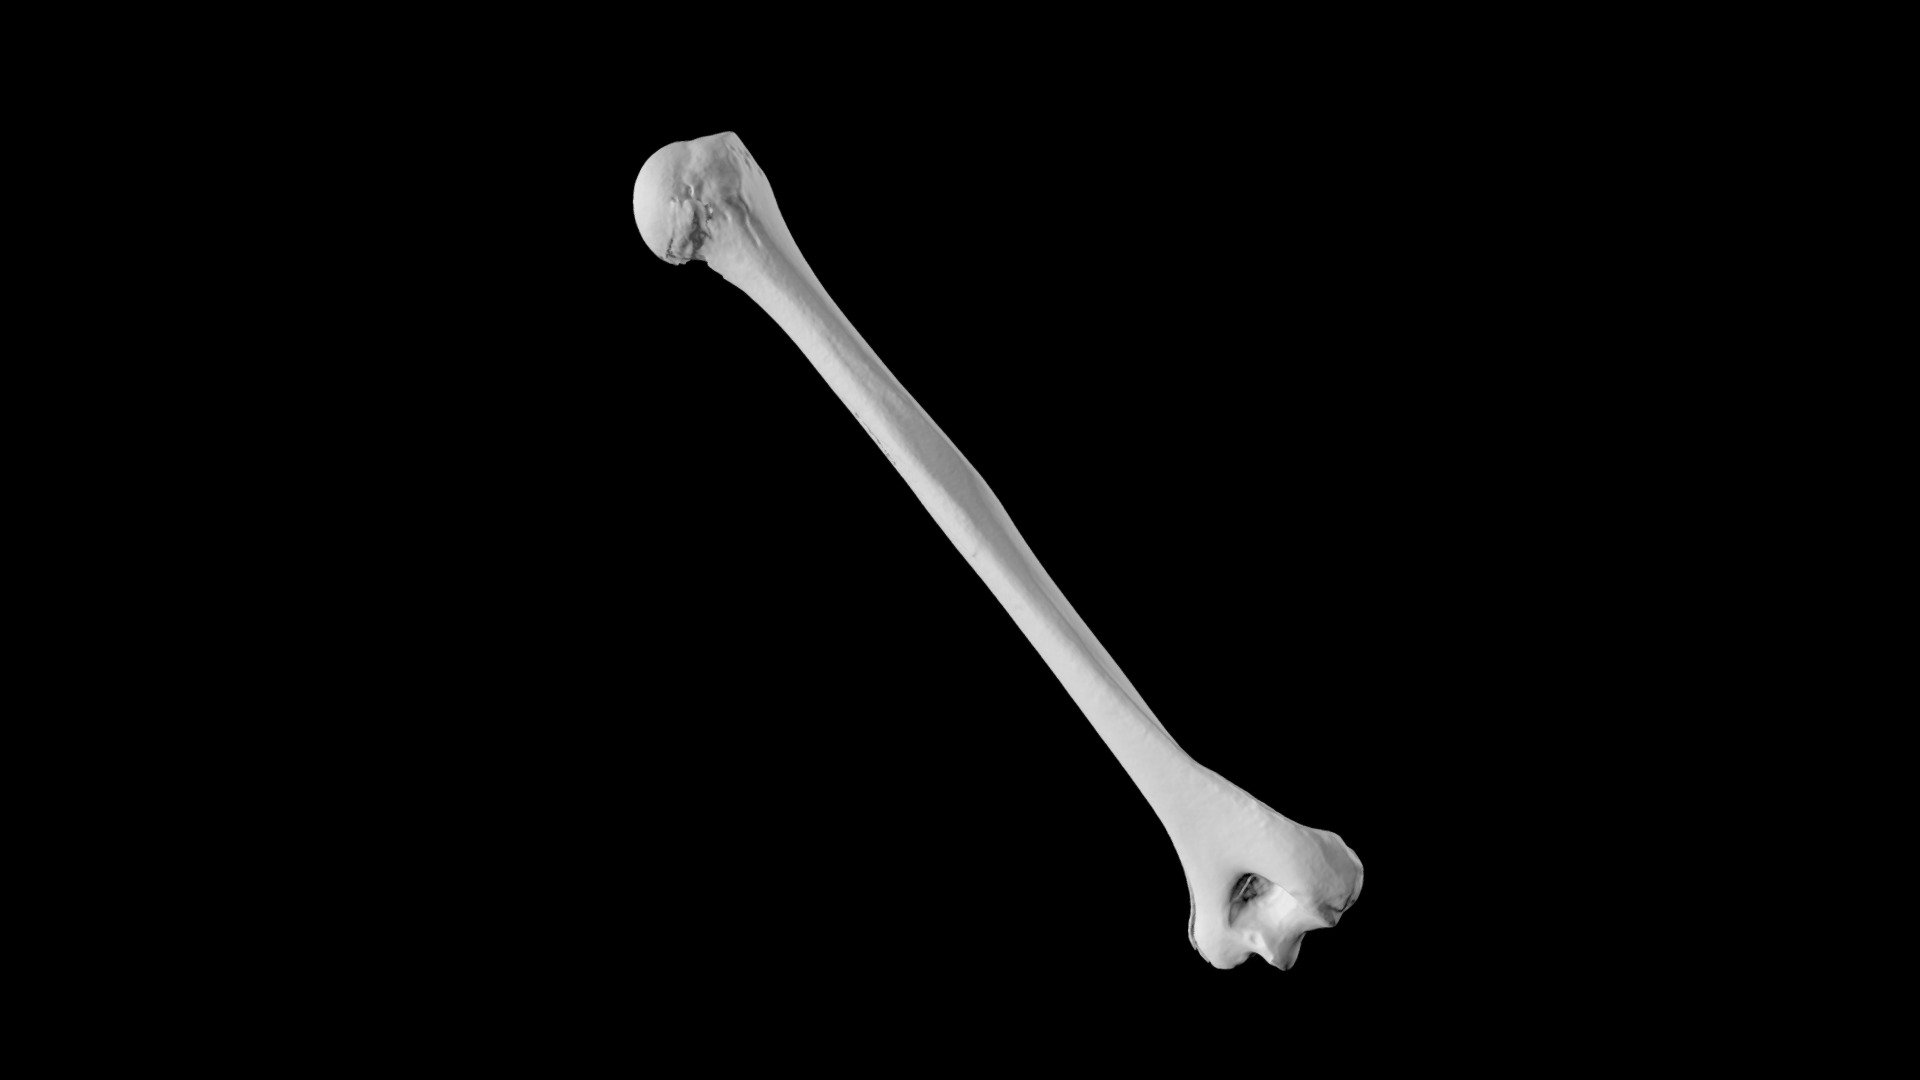 Human Humerus Download Free 3d Model By Eric Bauer Ebauer4 548132d Sketchfab 8809